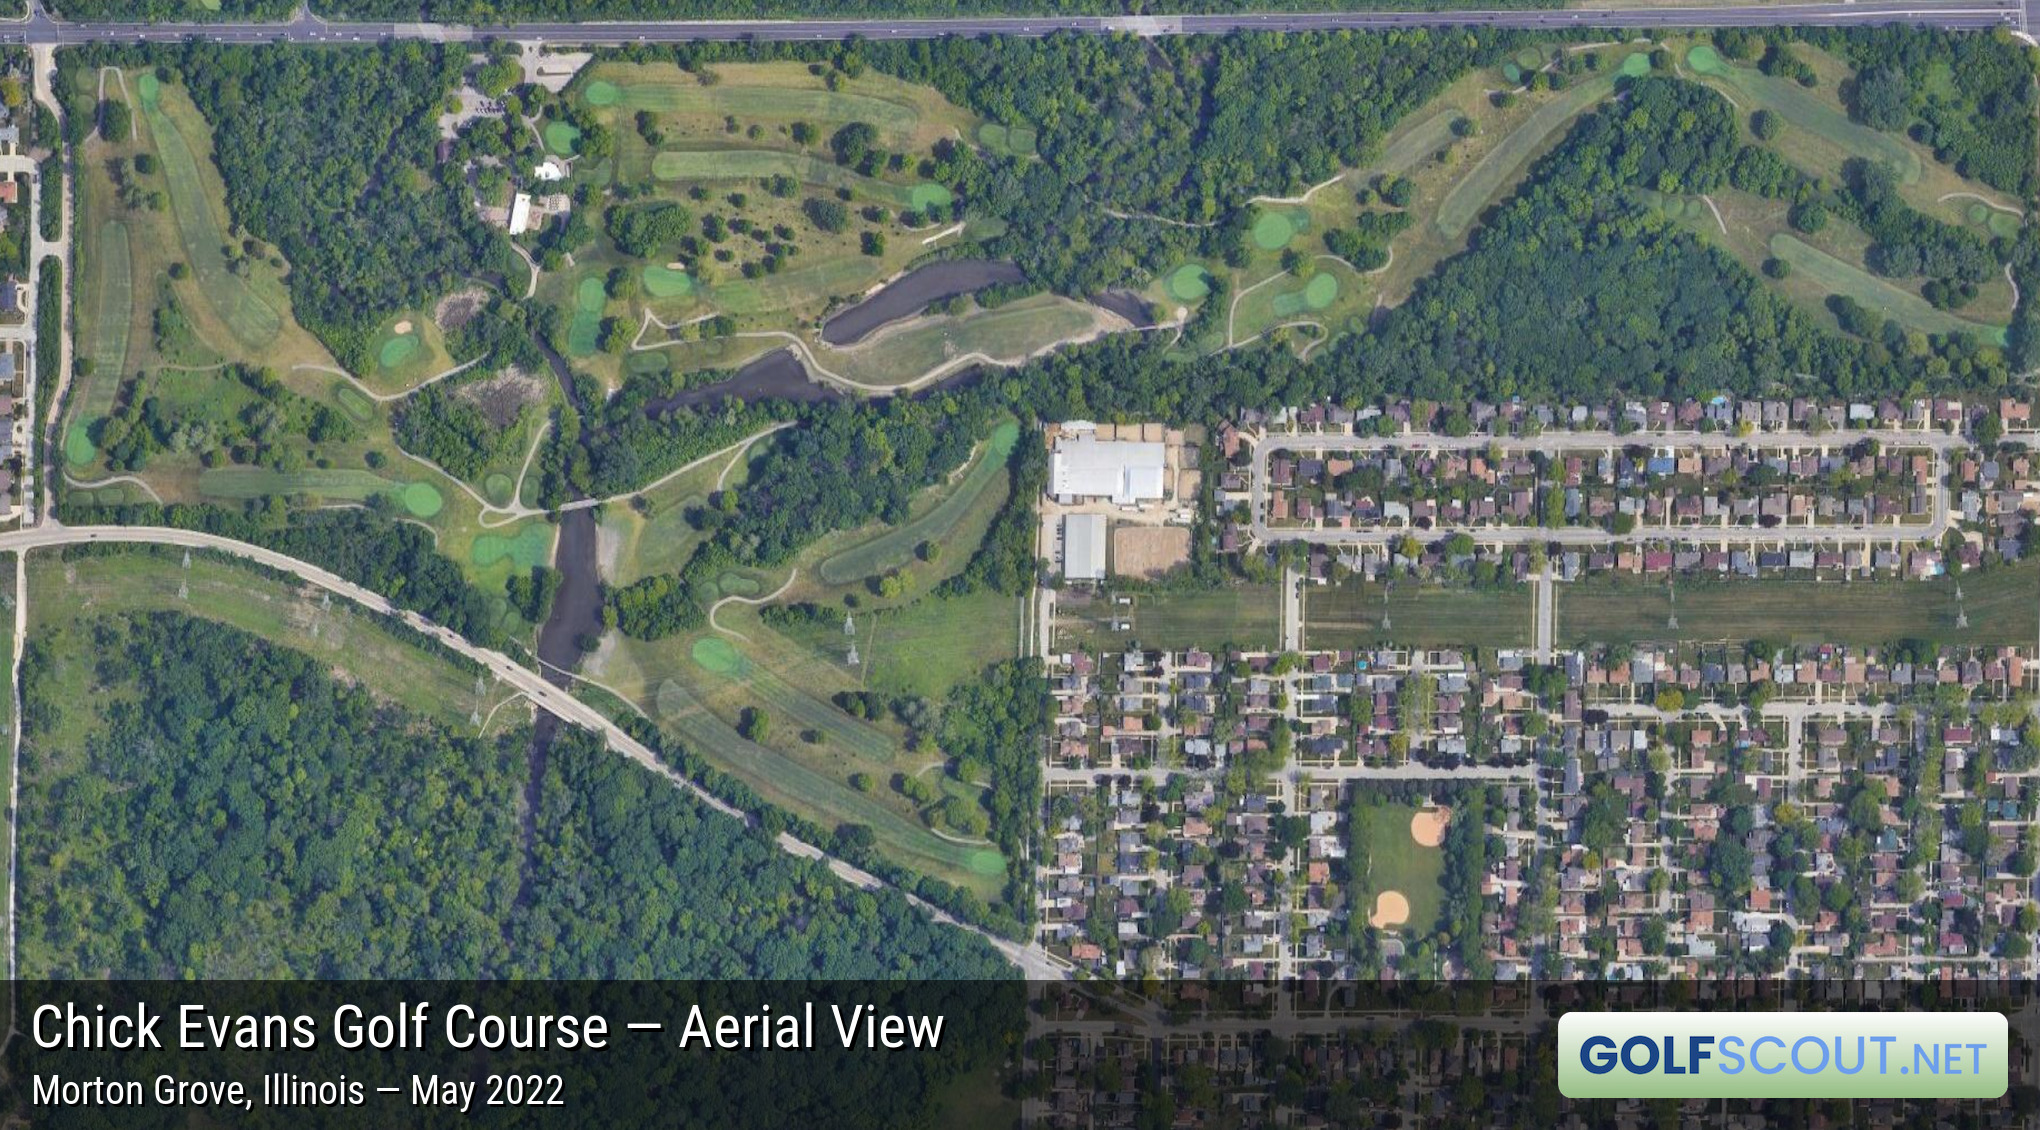 Aerial satellite imagery of Chick Evans Golf Course in Morton Grove, Illinois. Google Maps satellite photo of Chick Evans. Image owned by Google.